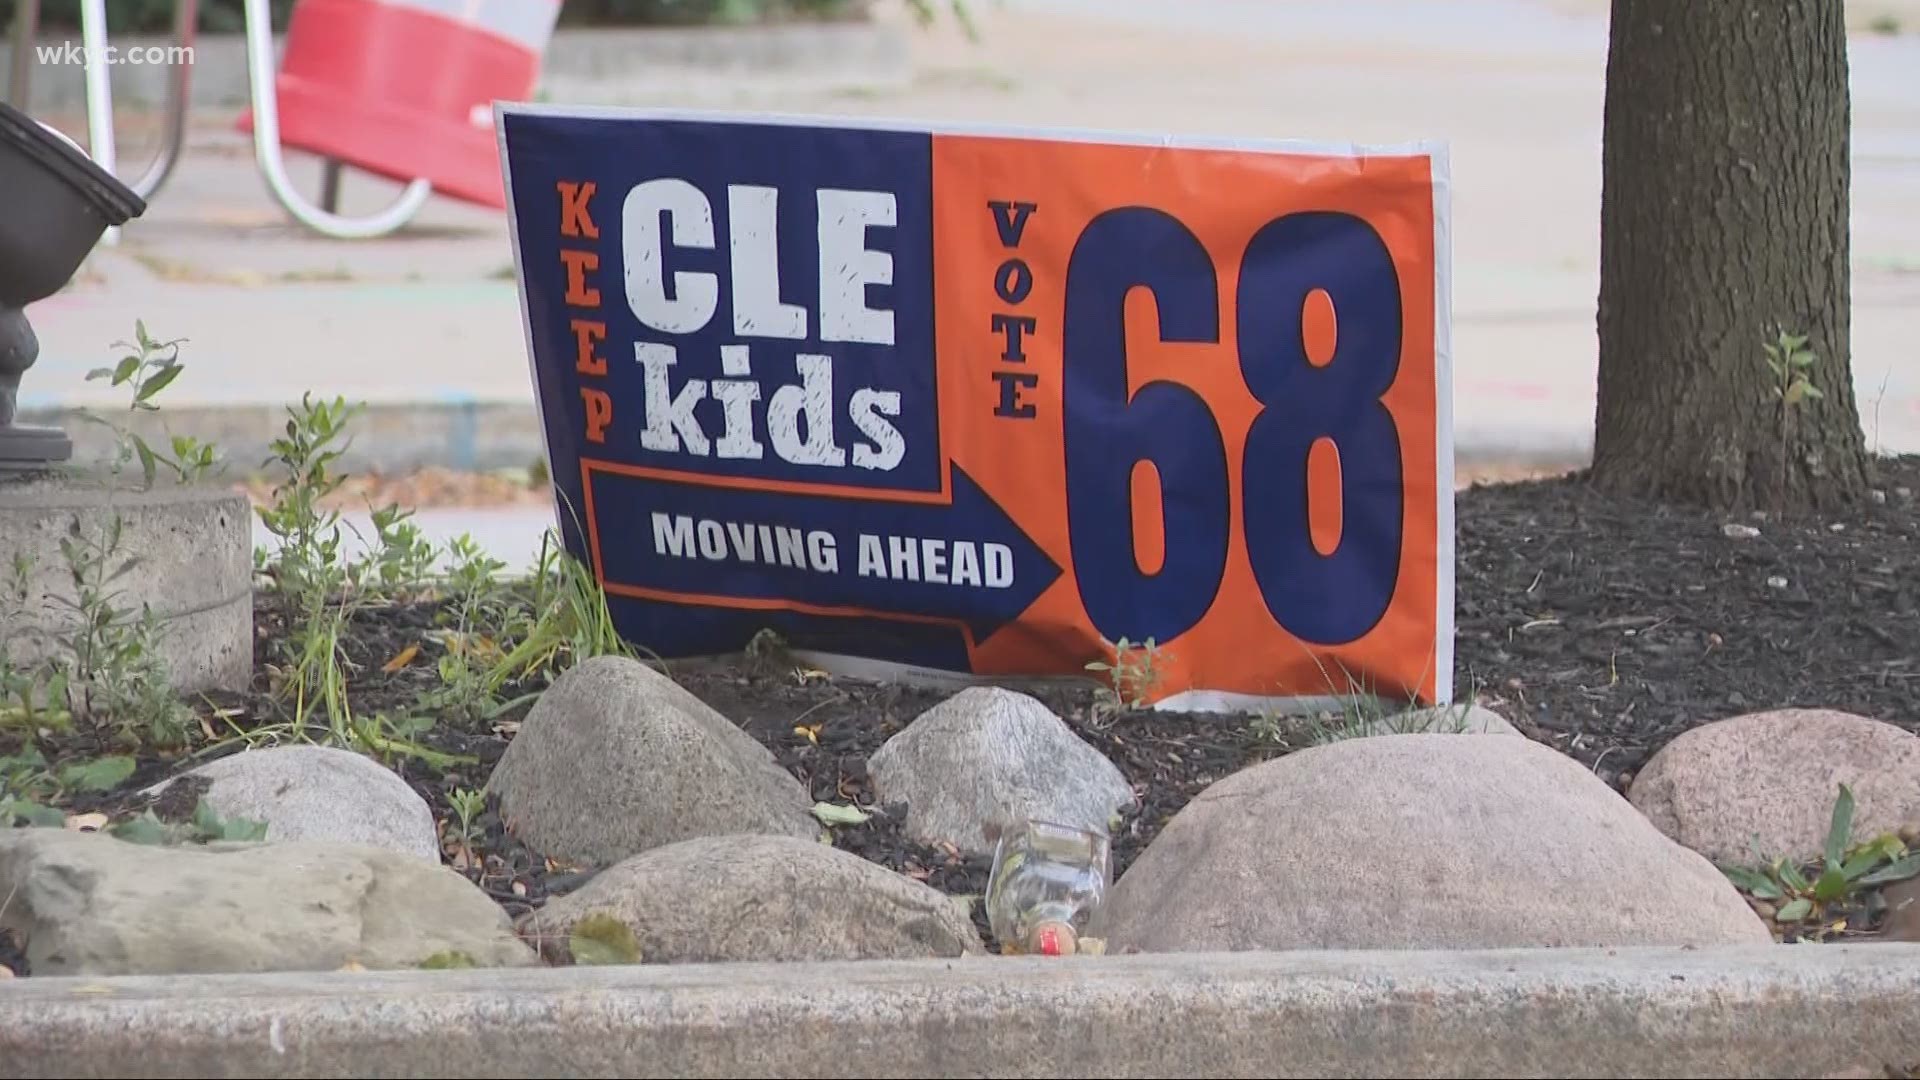 Nov. 4, 2020: The Cleveland Metropolitan School District has earned the support of its voters who passed issue 68, which is a 15-mill renewal with a 5-mill increase.